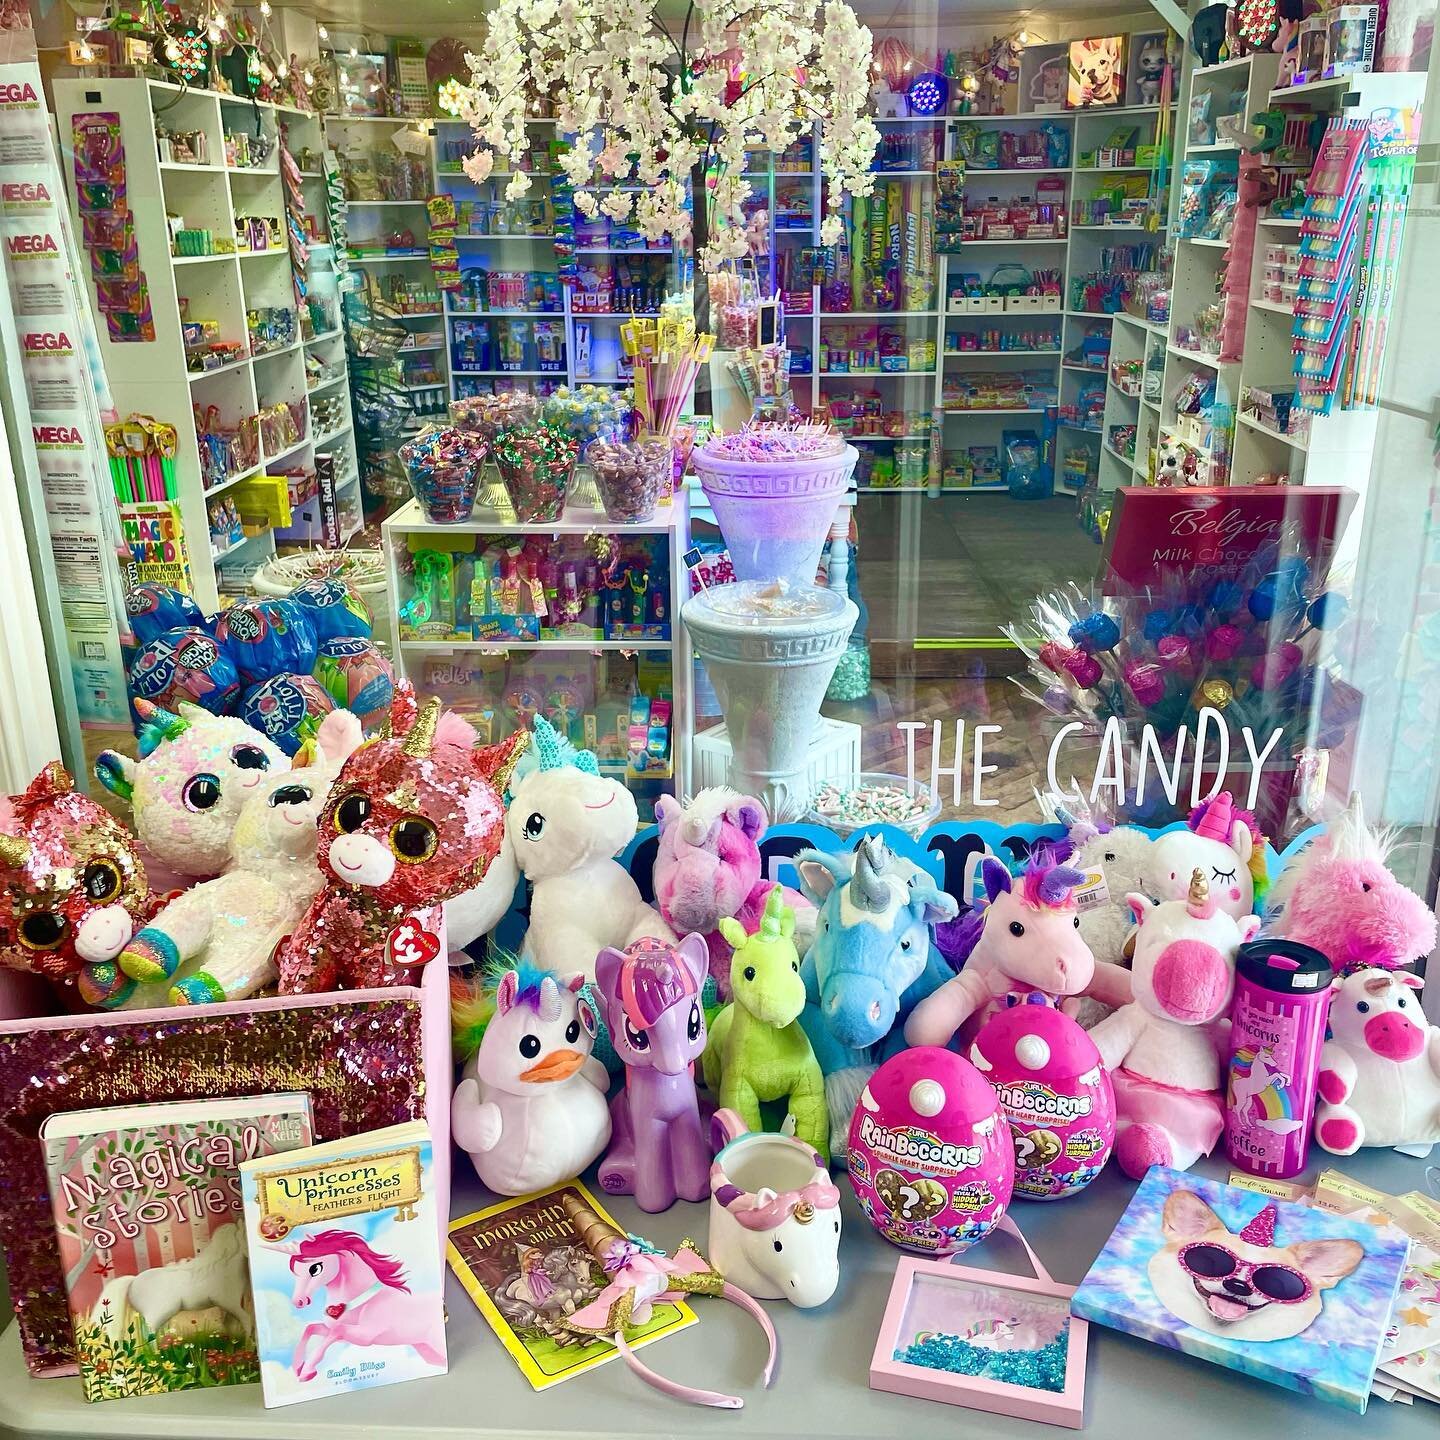 BEAT THE HEAT with the The Candy Unicornium&rsquo;s Indoor Sidewalk Sale of UNICORNS!!!🦄✨💖🦄🍭🍬🦄
All Sparkle/Glittery Unicorns are today only $12 instead of $15!! 
Open today 1:00-7:00PM!!!! #unicorn #unicornium #unicornparty #thecandyunicornium 